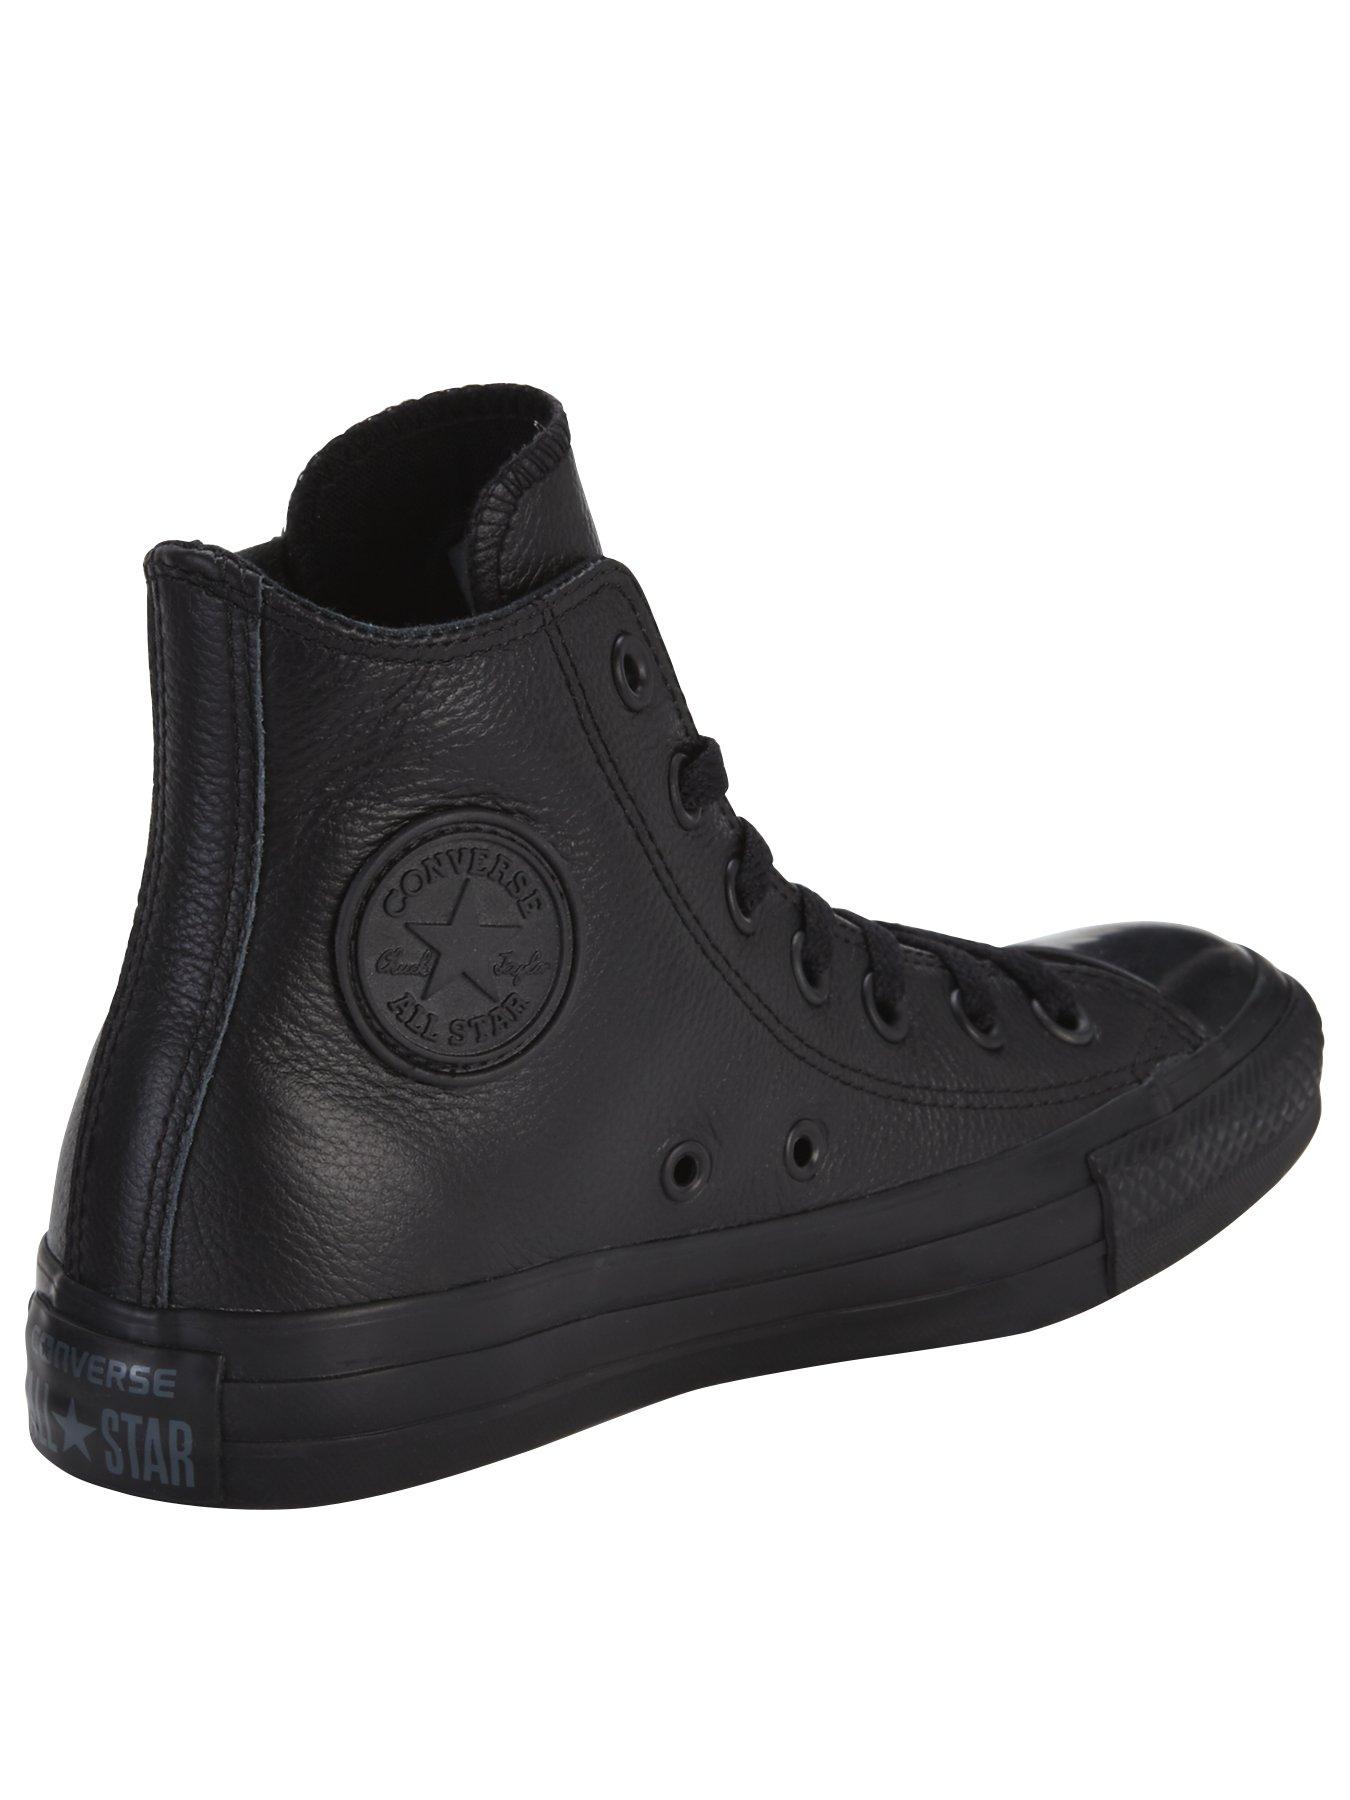 converse all star hi leather nere